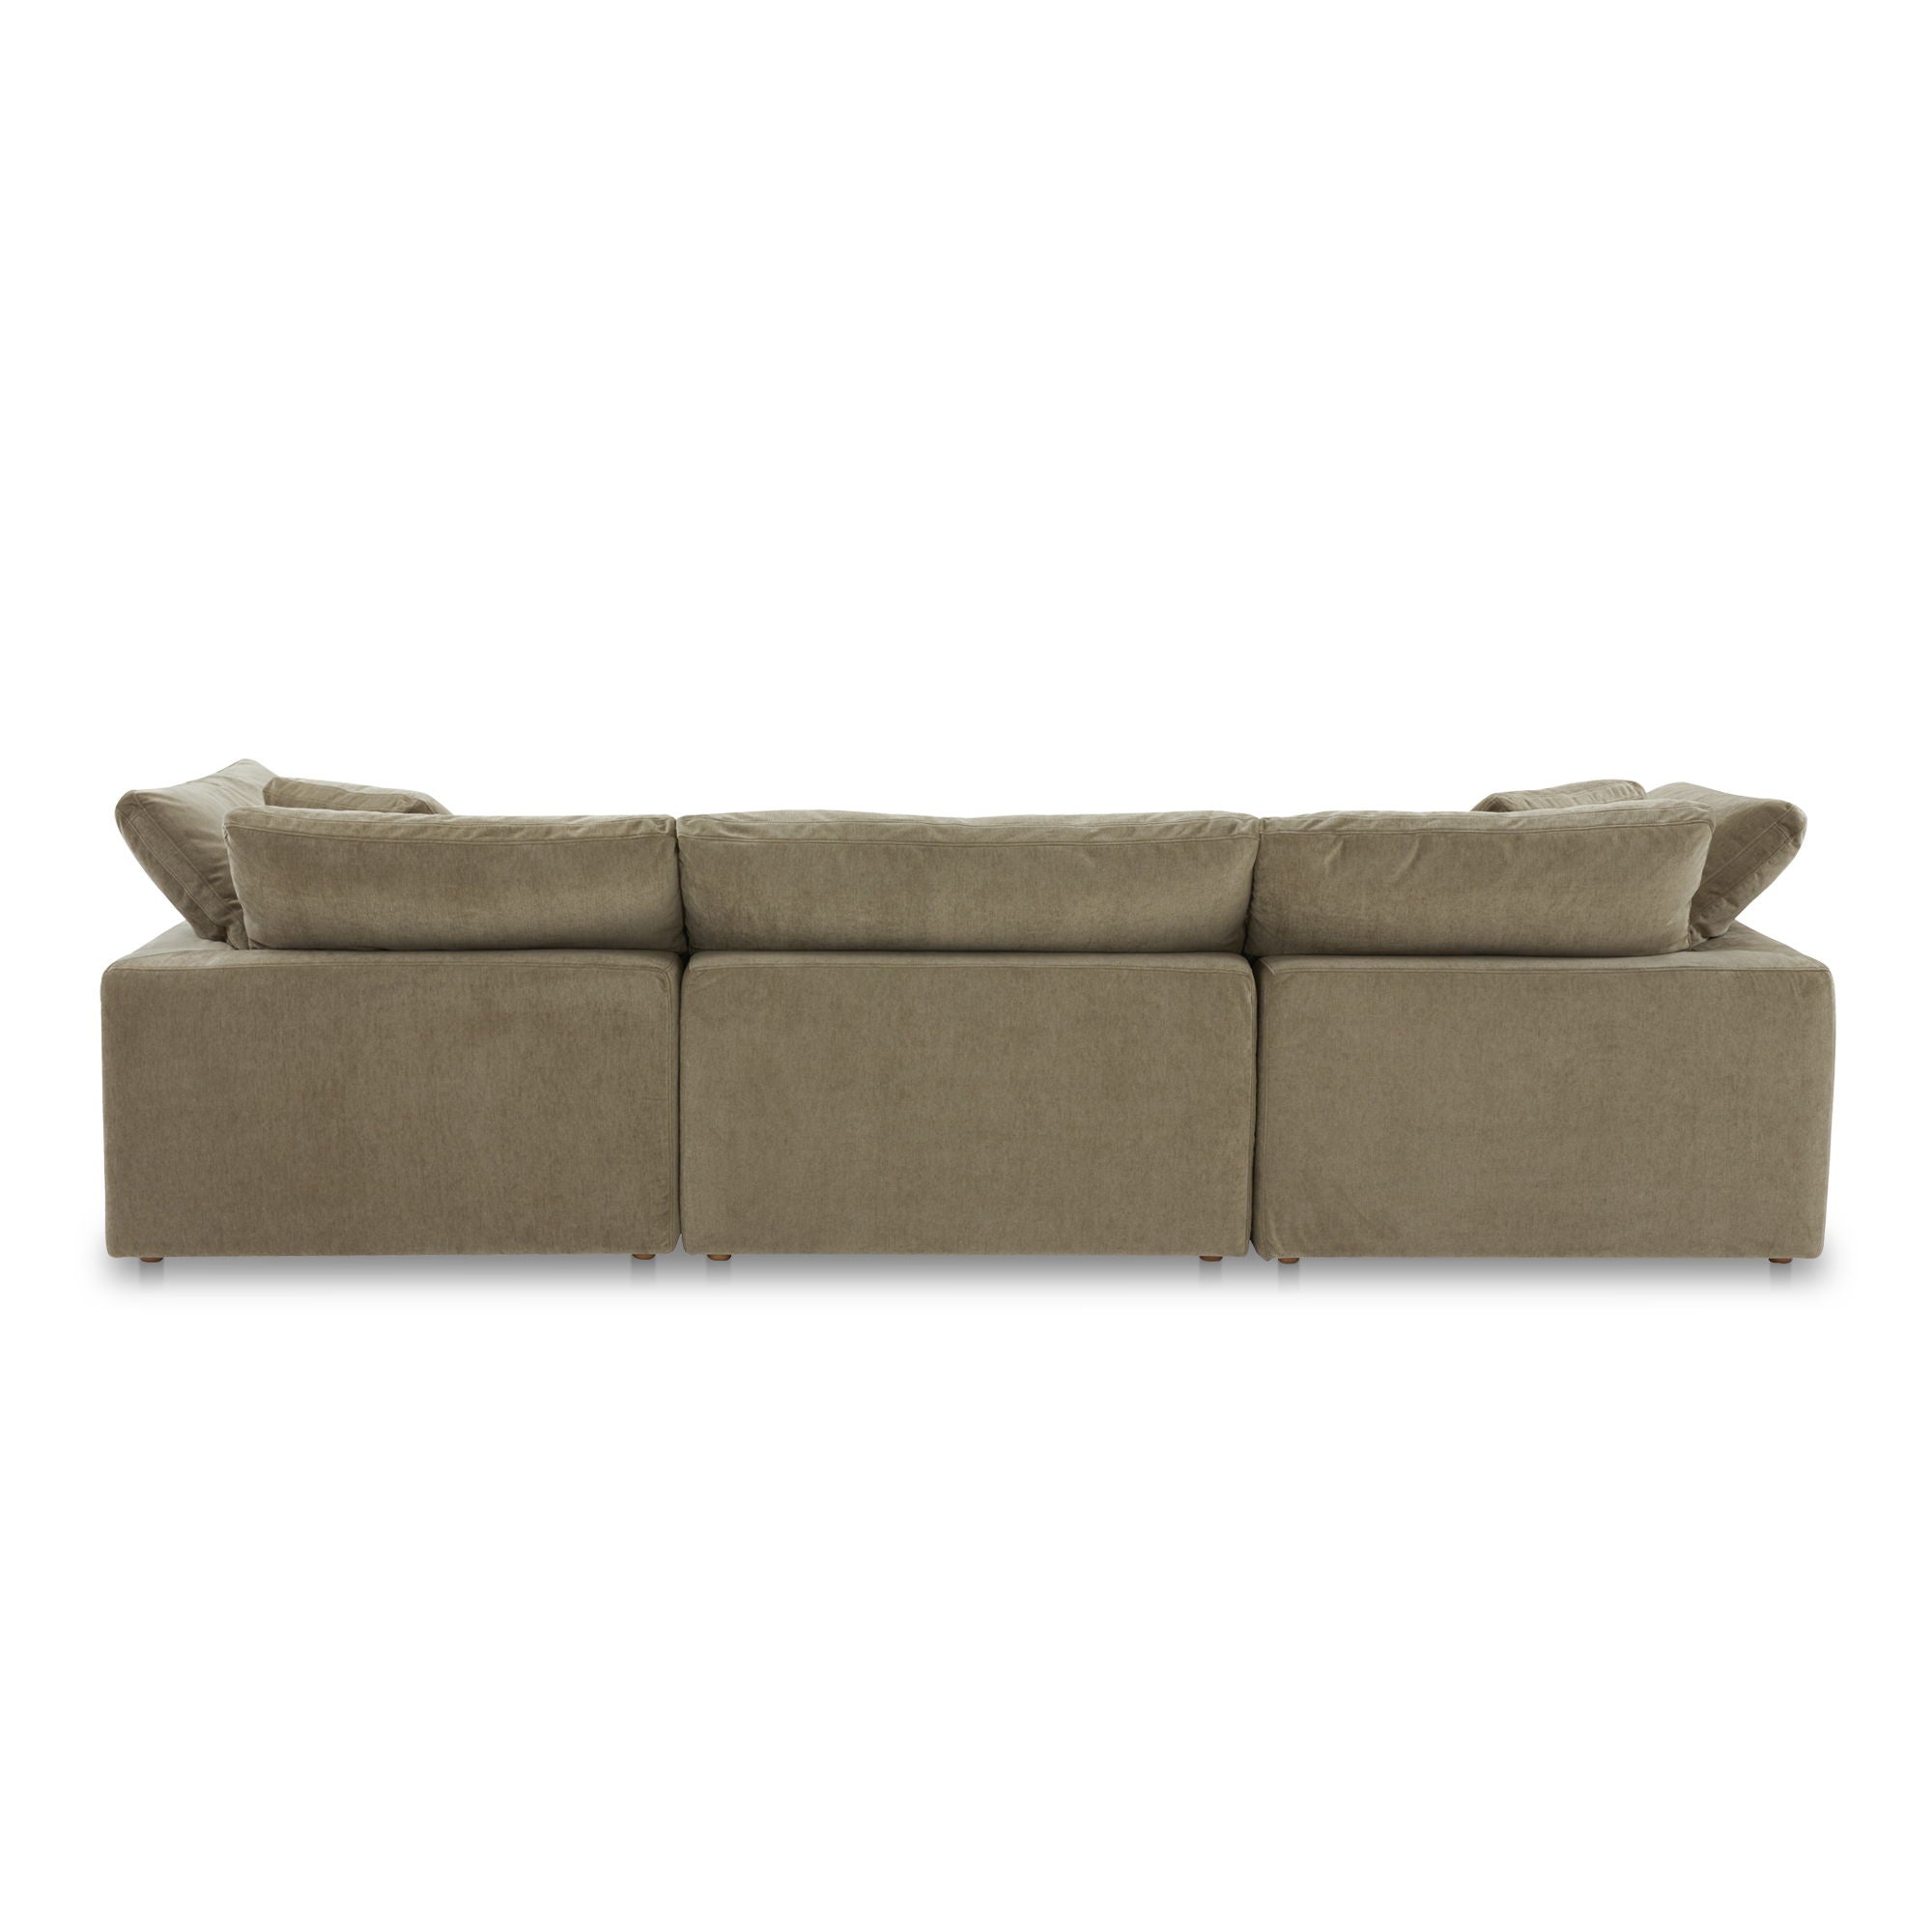 Terra Dream Modular Sectional - Desert Sage - Stain Resistant-Stationary Sectionals-American Furniture Outlet